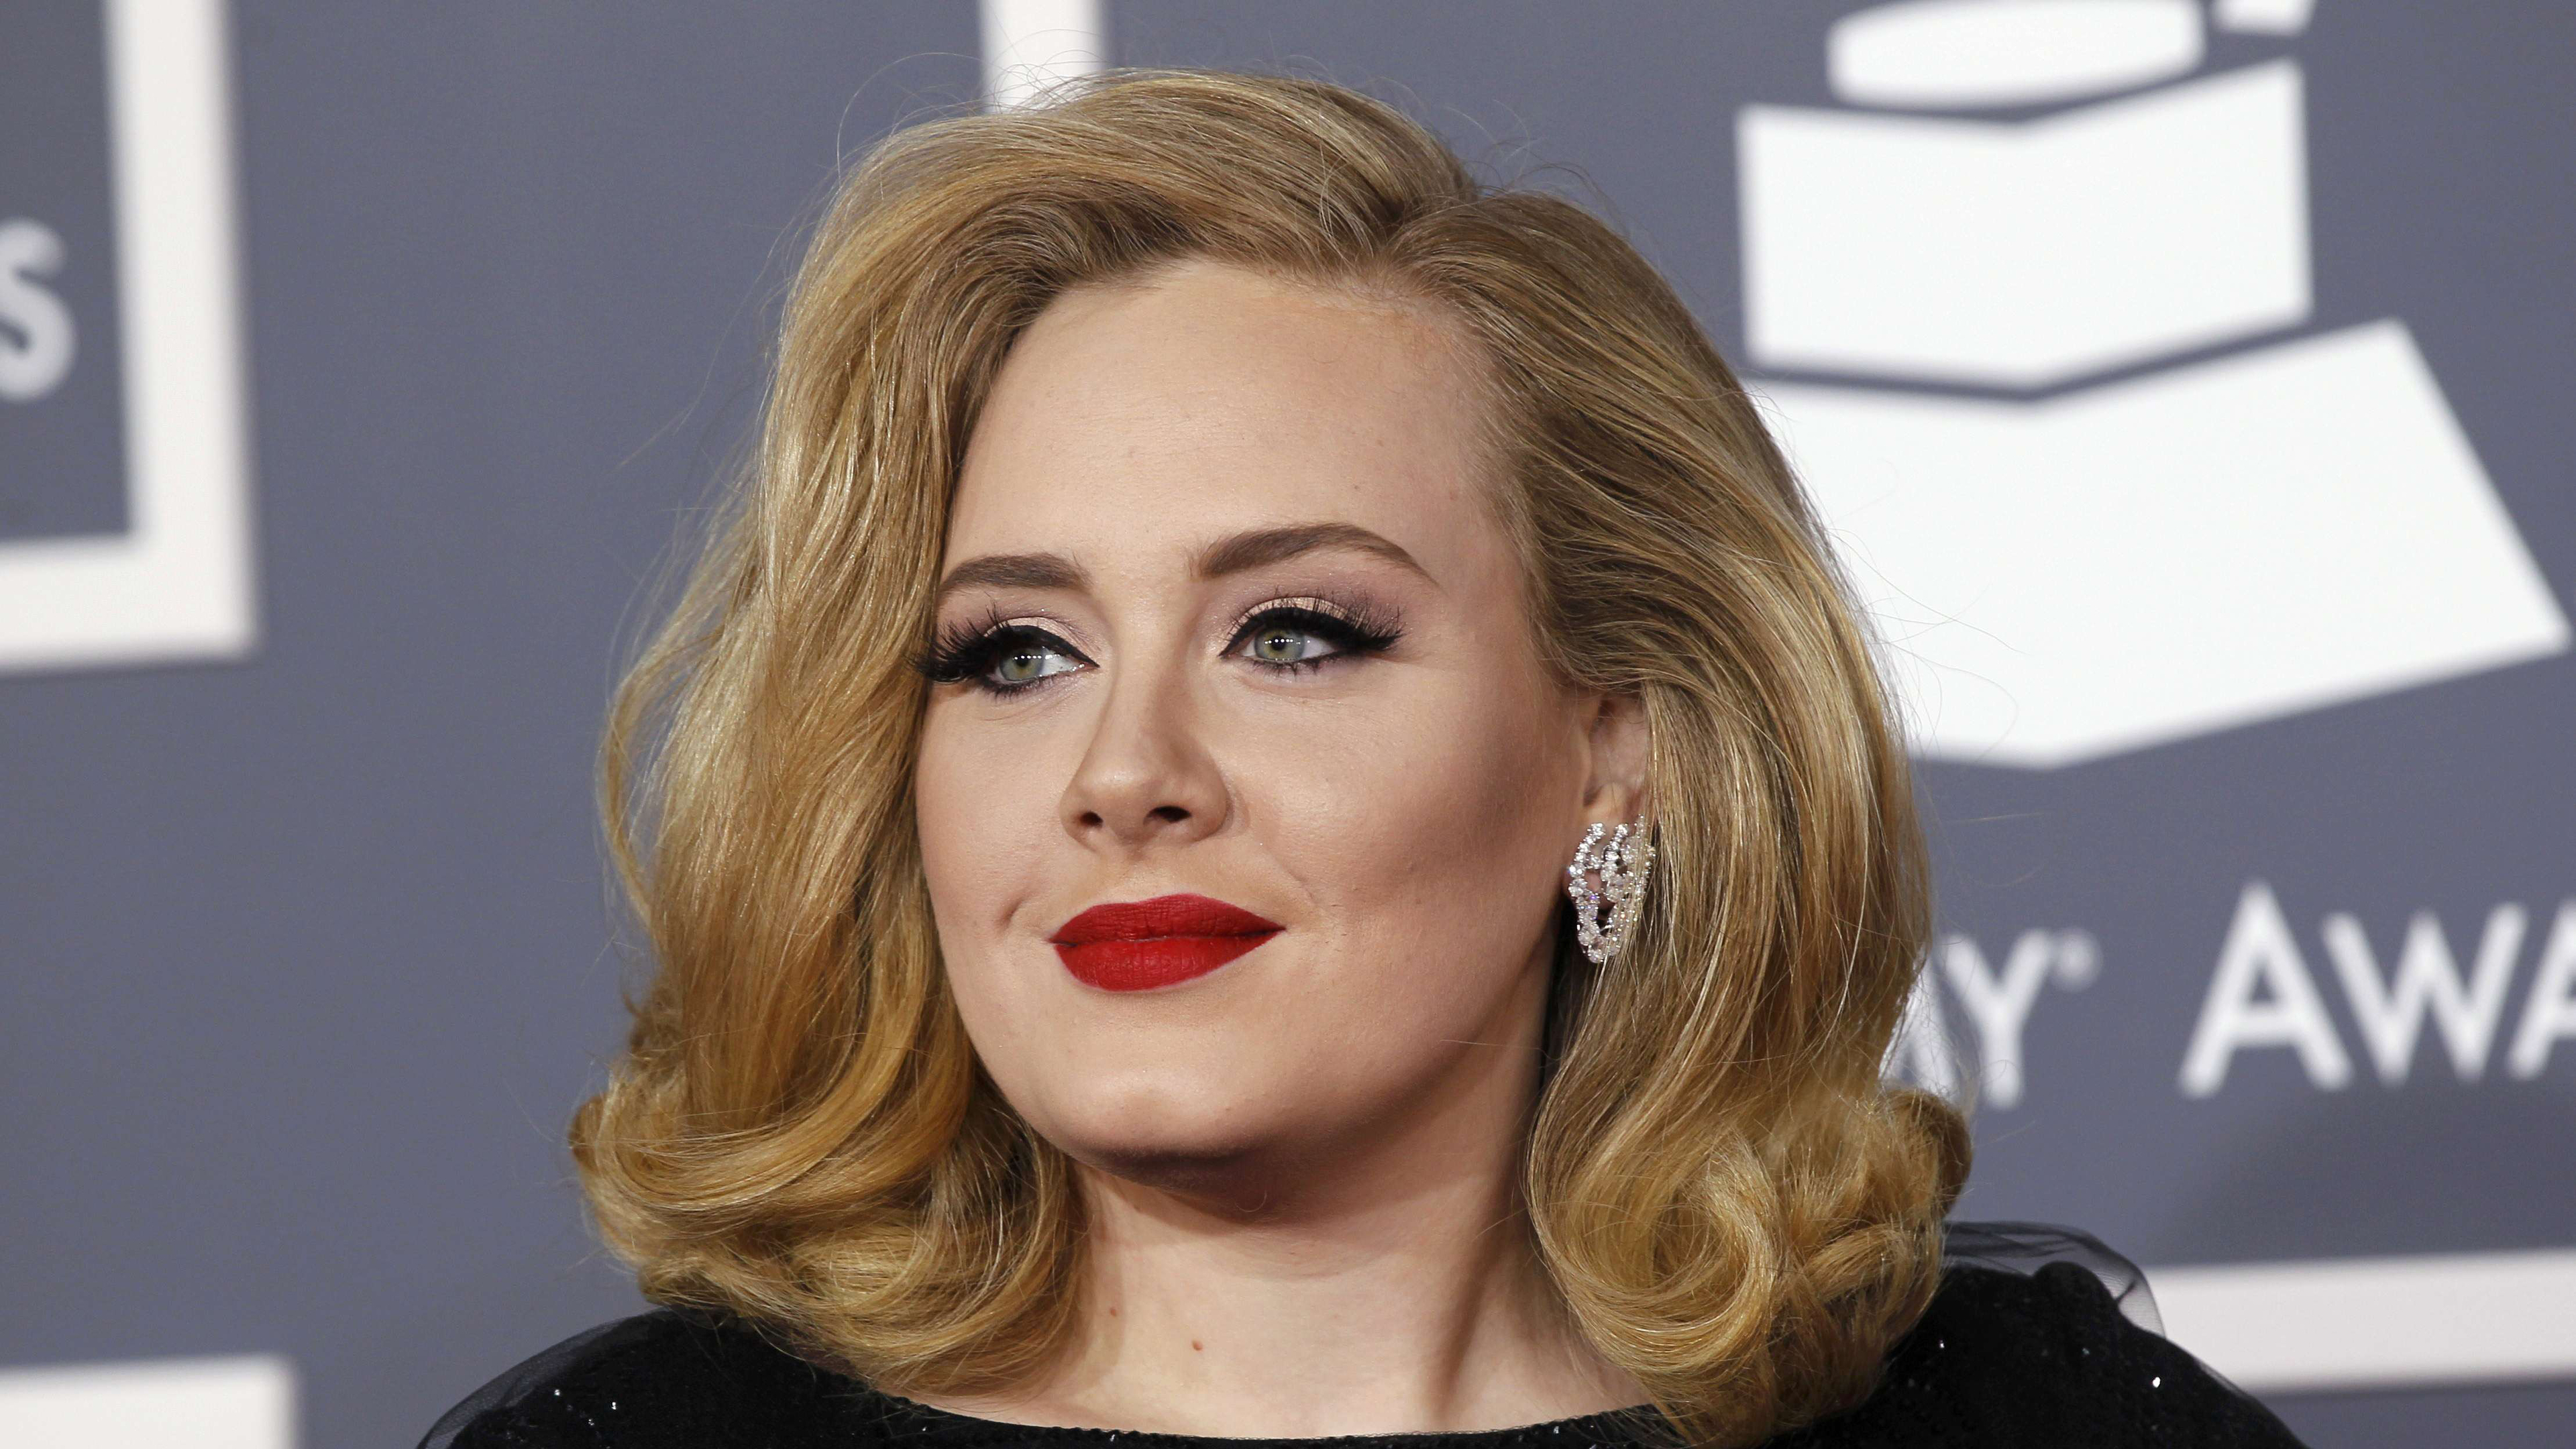 british, adele, music, singer cell phone wallpapers